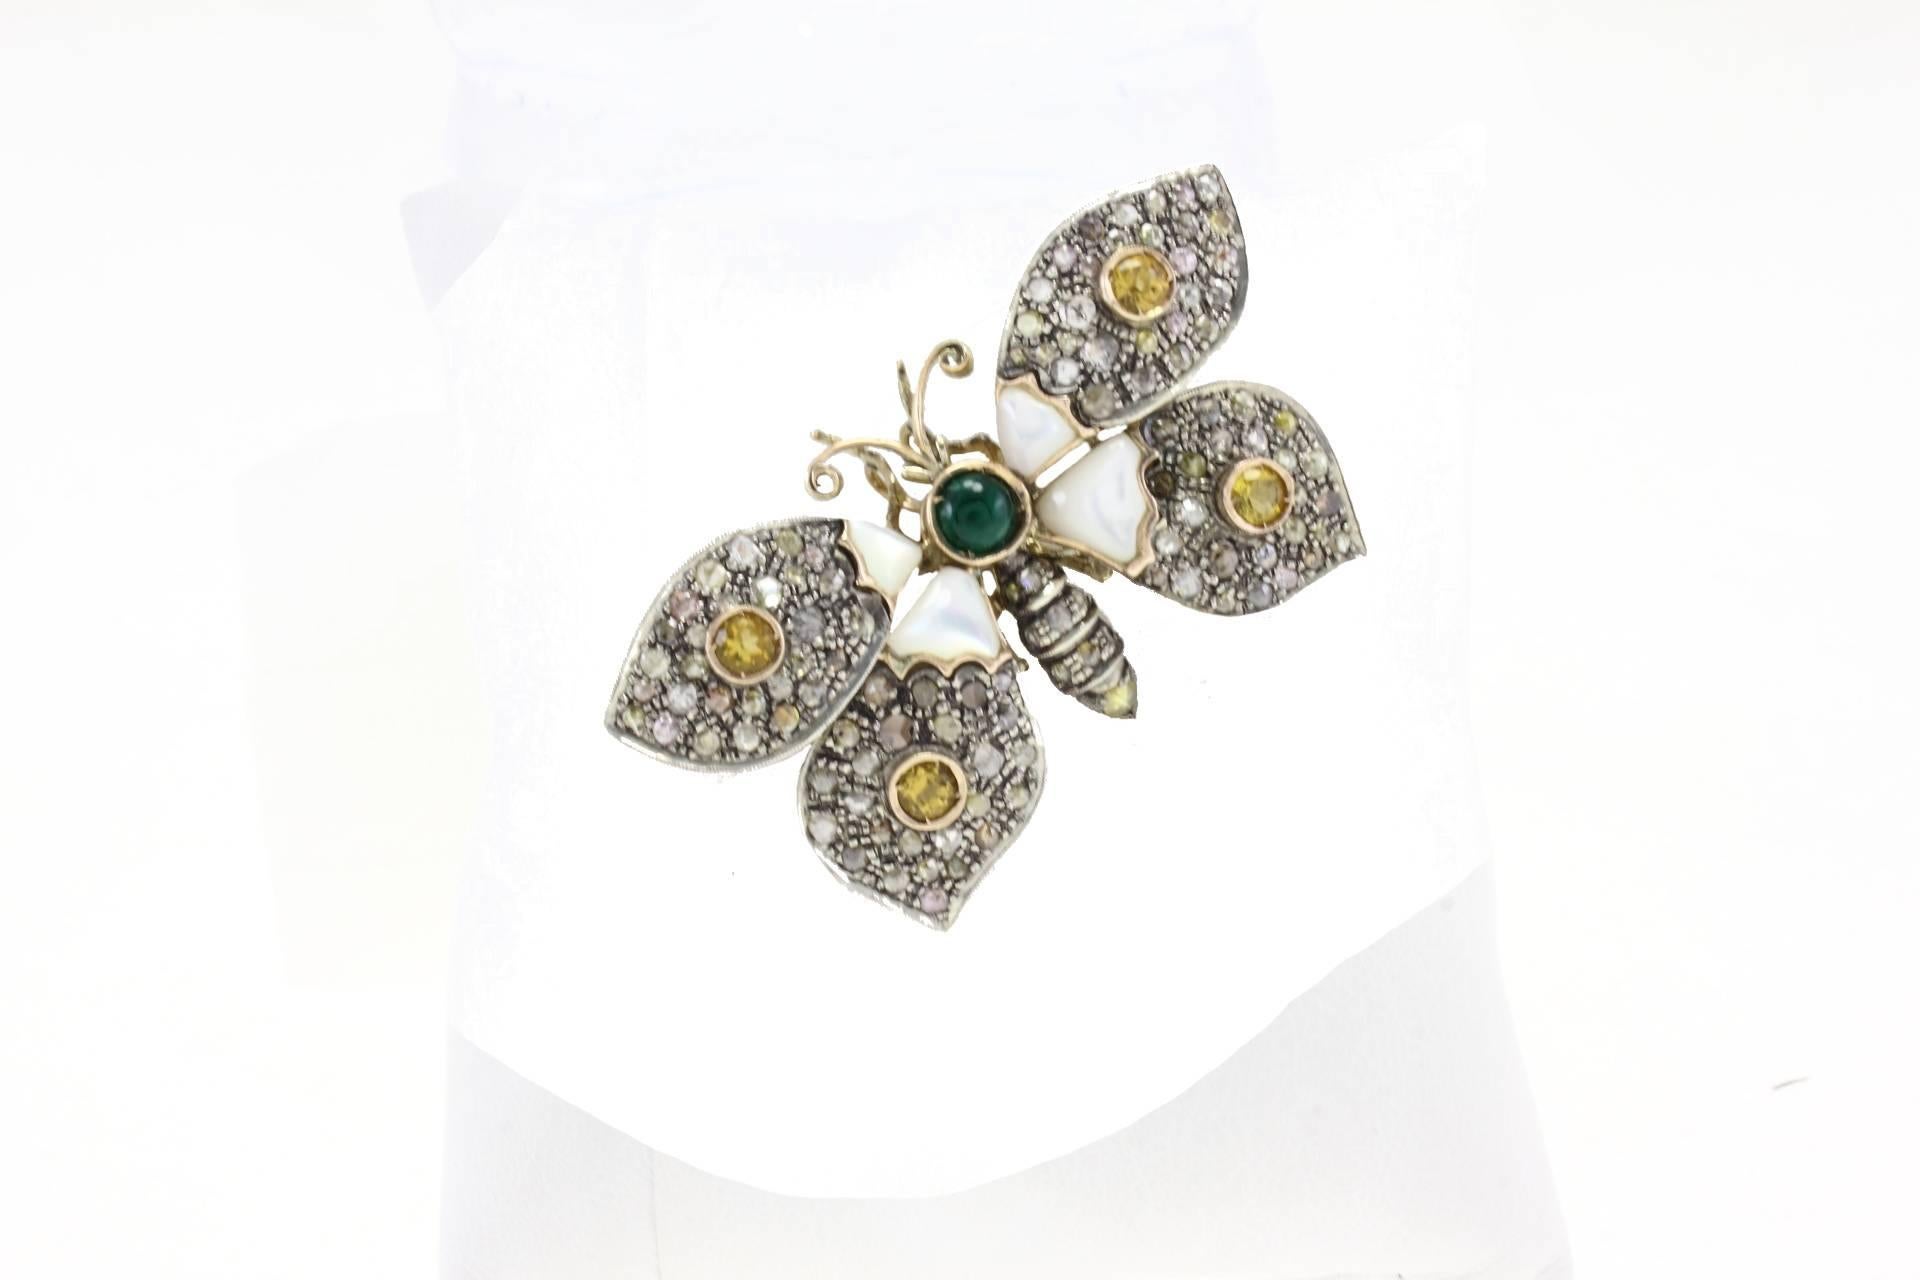 Butterfly shaped brooch/pendant in 9kt yellow gold and silver covered in rose cut fancy diamonds, 4 topazes a central emerald surrounded by mother of pearls.

gold 9.10gr
silver 8.40gr
diamonds 11.95kt
gems 2.53kt
mother of pearl 0.8gr
tot weight